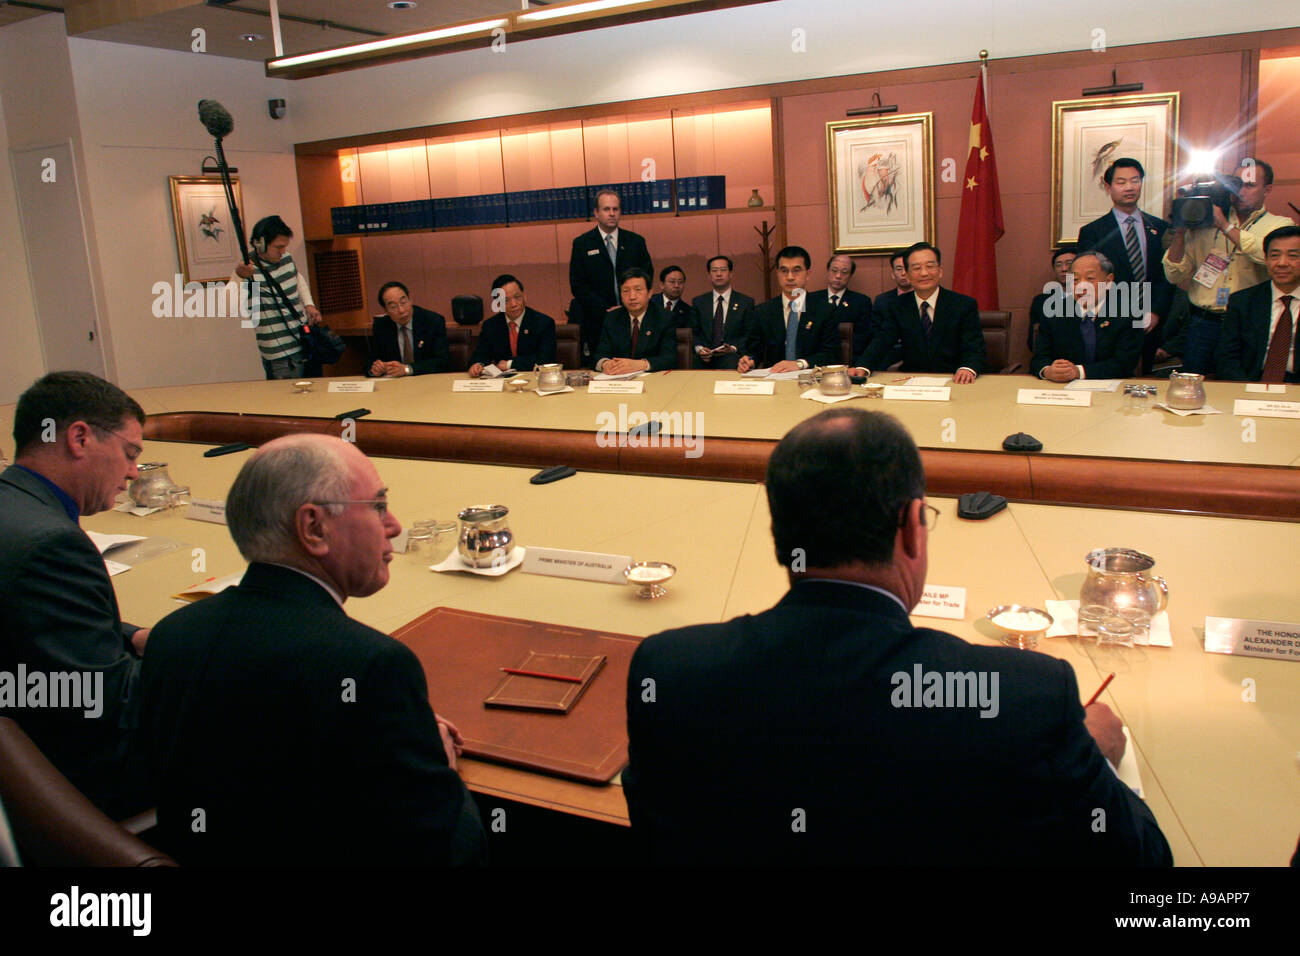 Cabinet Room In Australian Federal Government Stock Photo 7032550